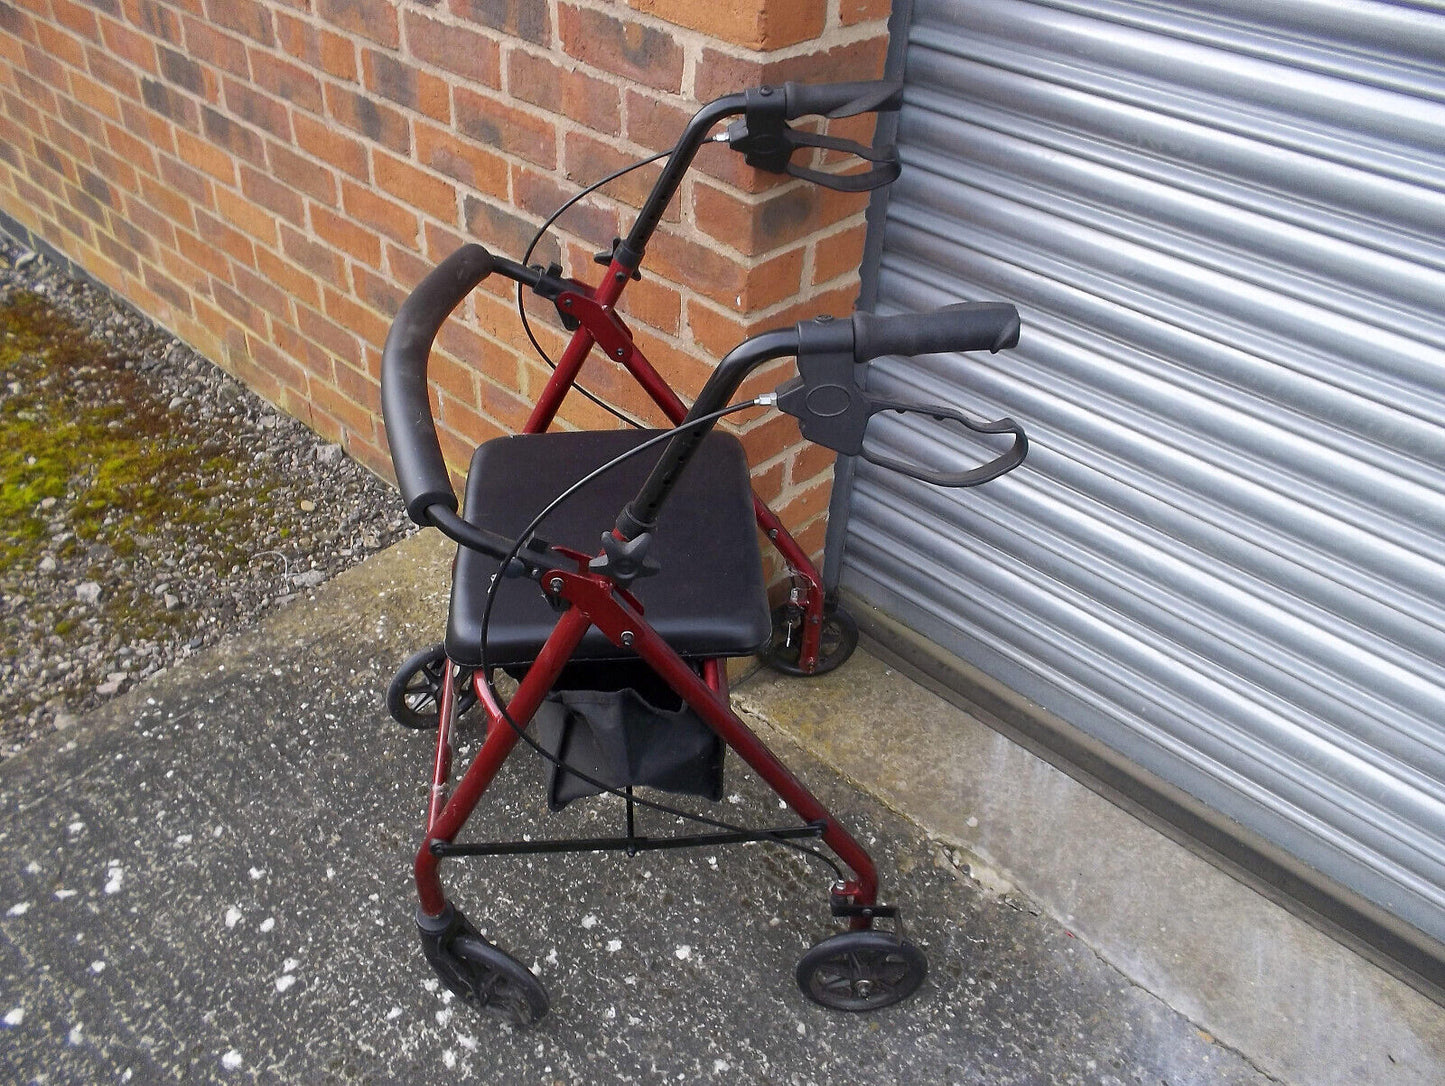 Care Co R8RD-59 R8 Aluminium Rollator 6" Wheels, Fold Up Removable Back Support